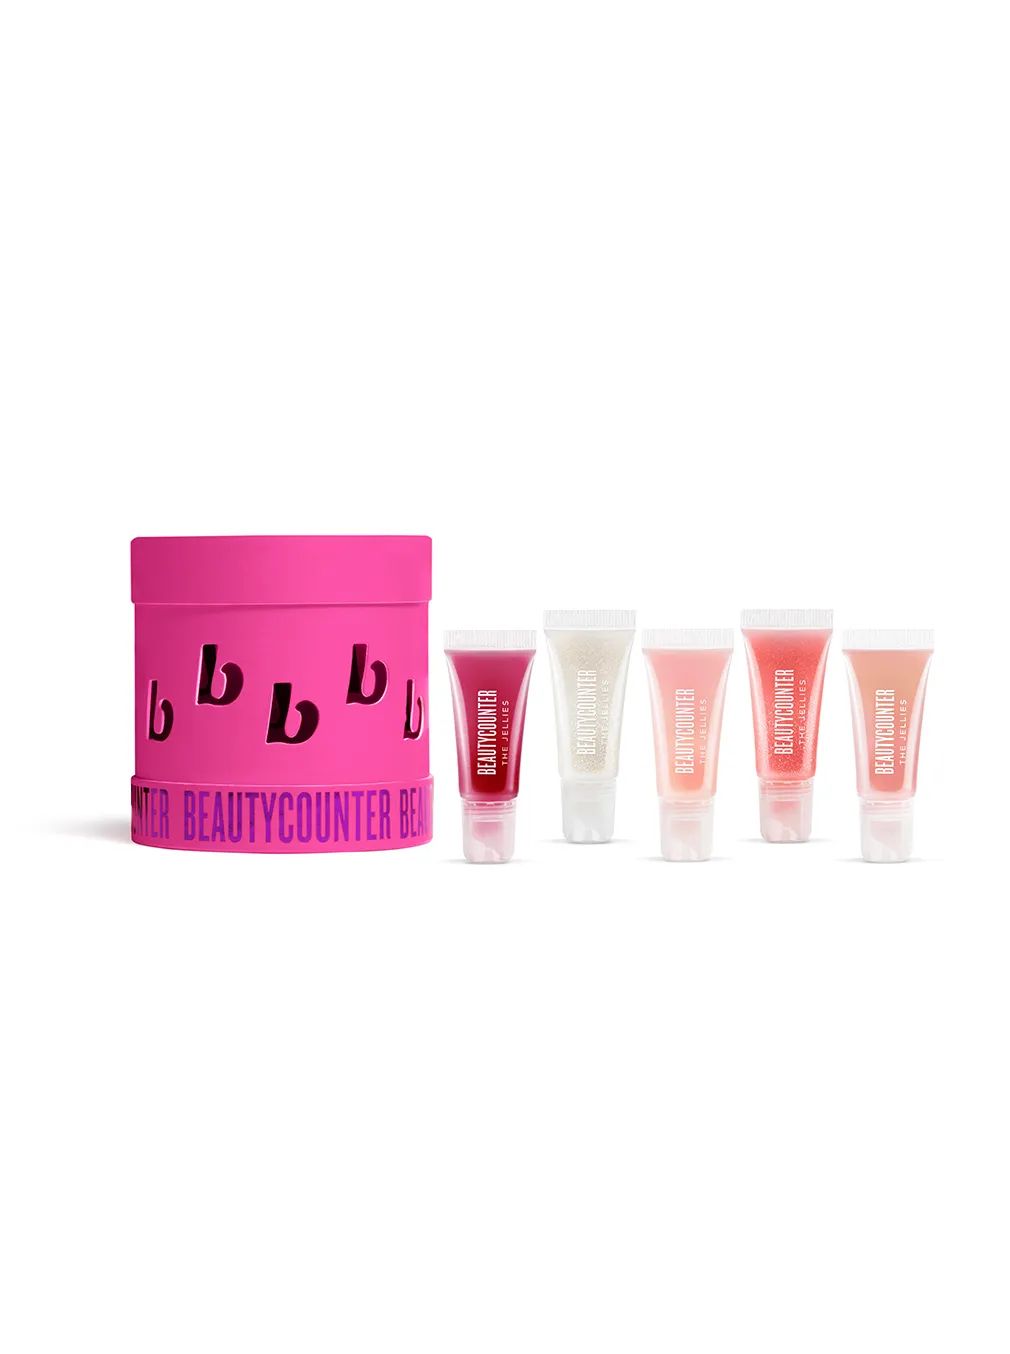 Main Squeeze Lip Jellies - Beautycounter - Skin Care, Makeup, Bath and Body and more! | Beautycounter.com